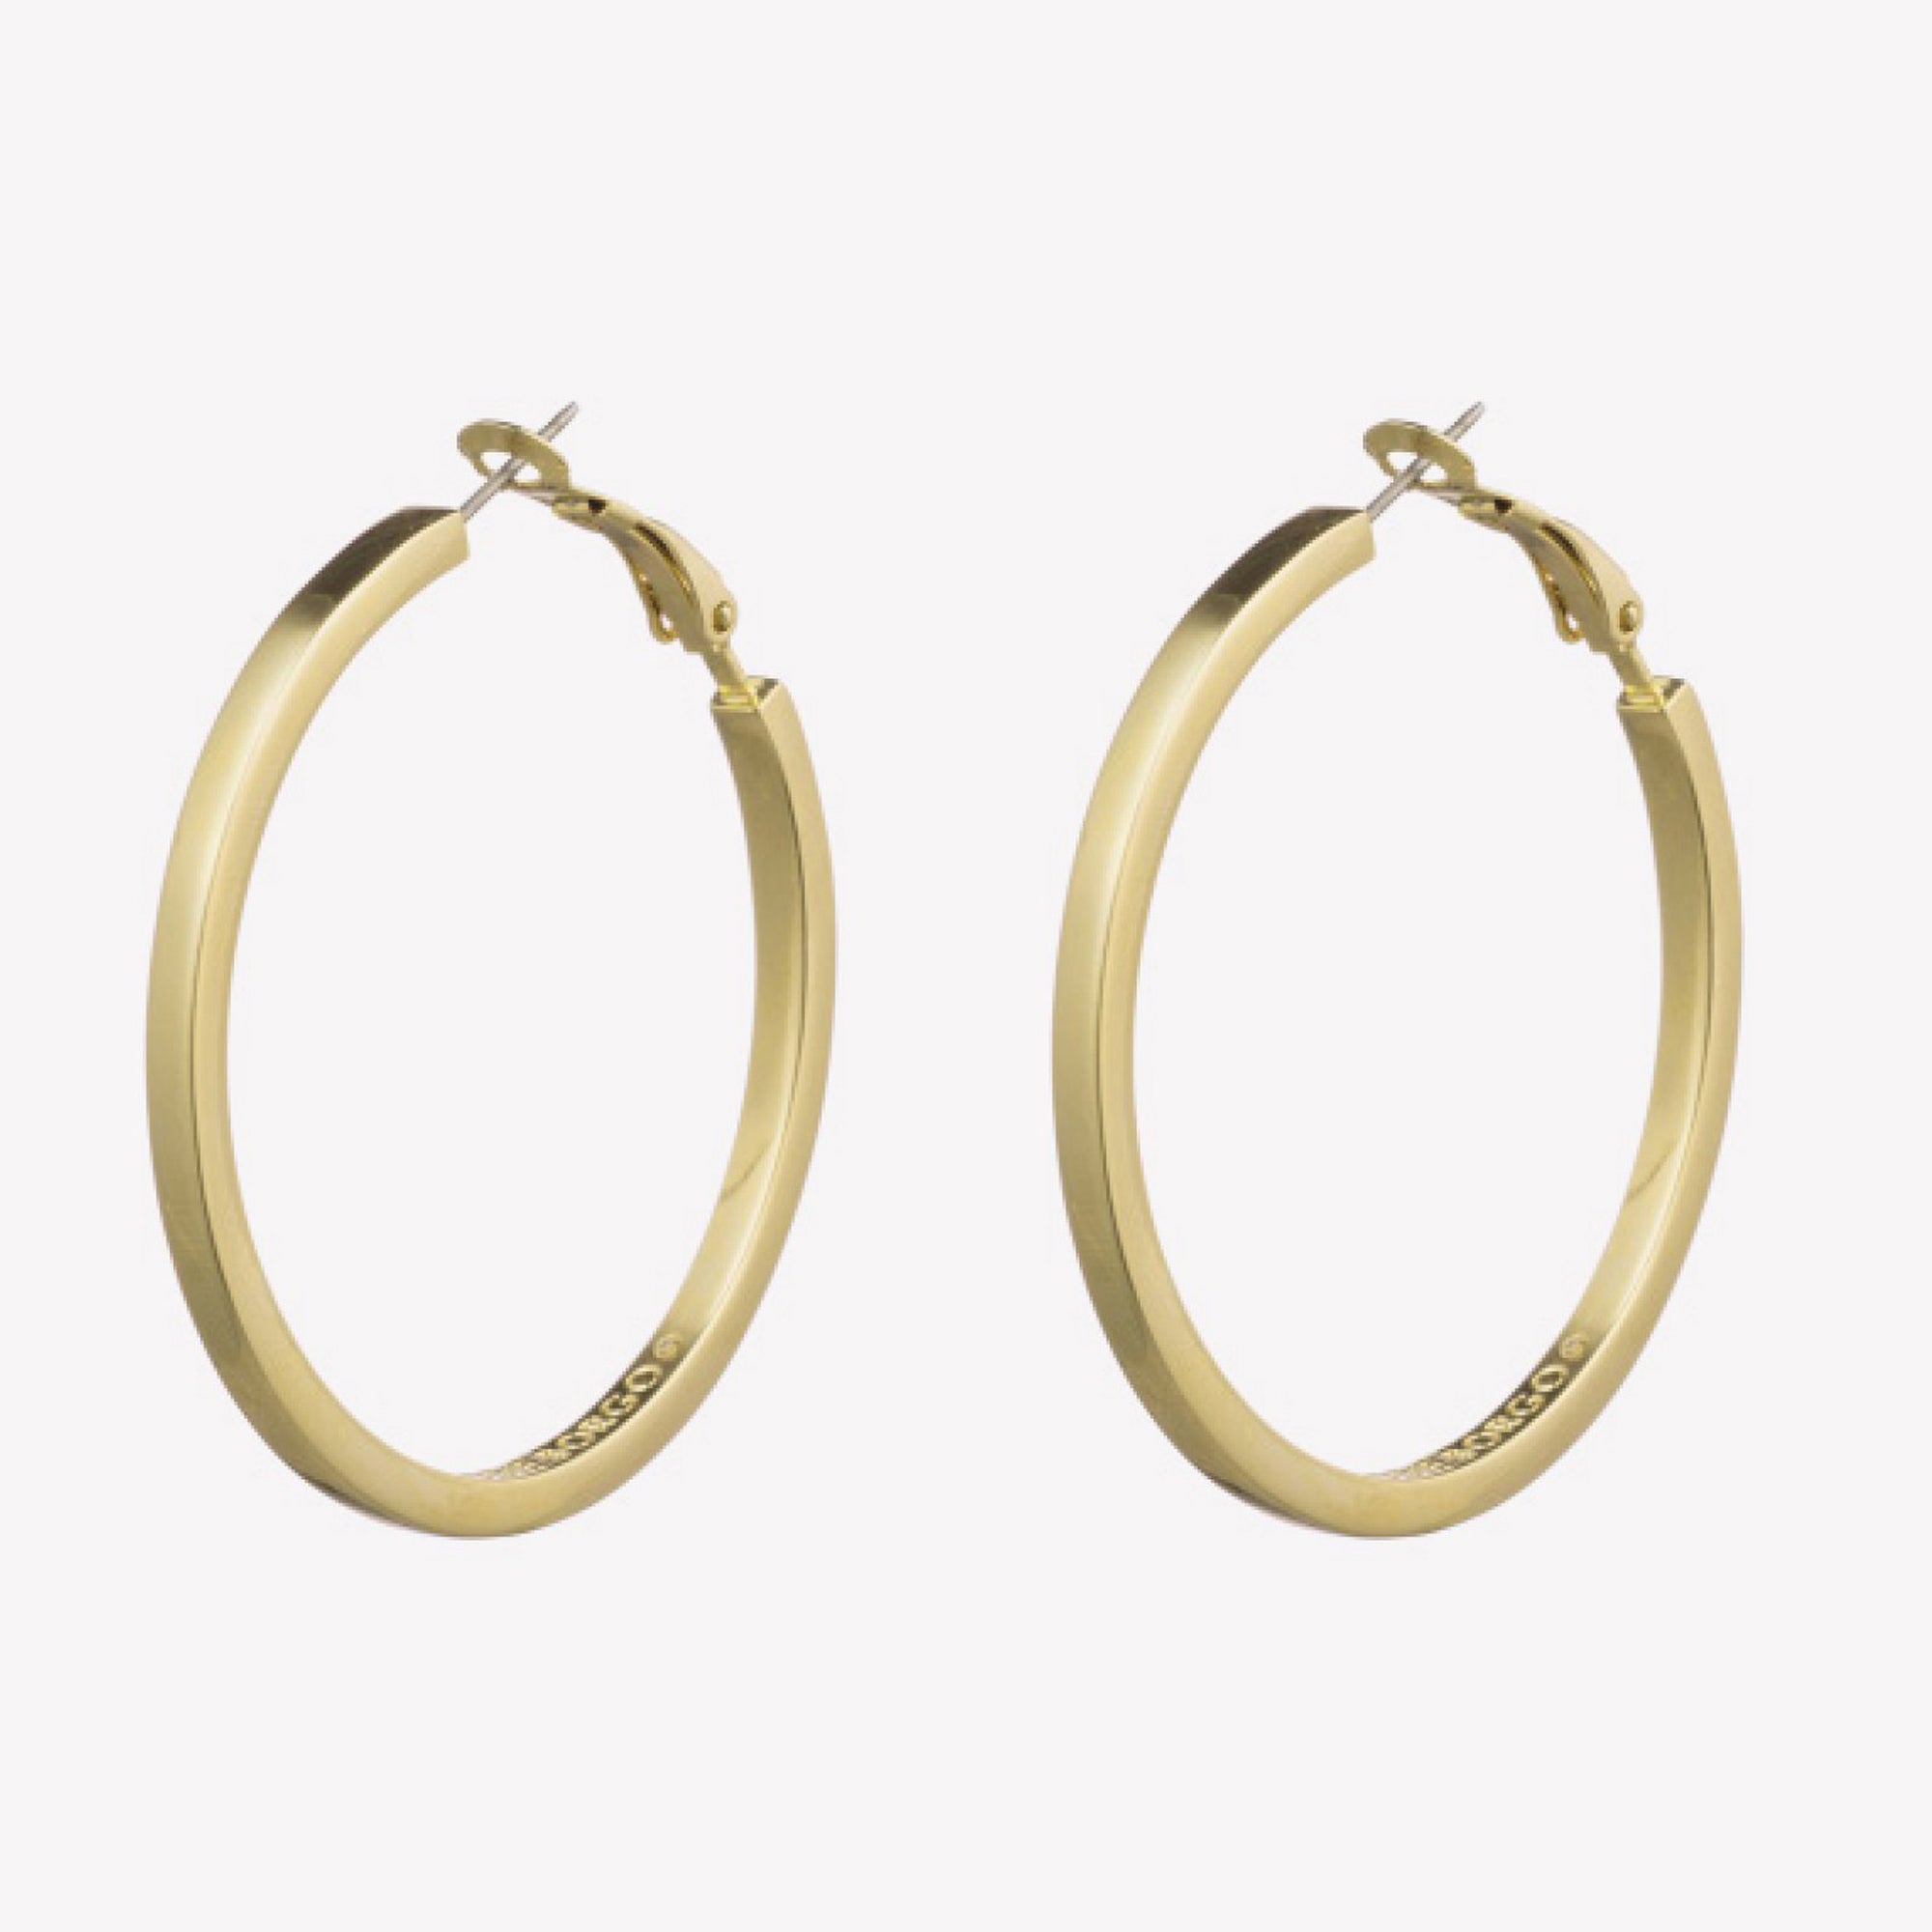 Amazon.com: Clip-on Earrings Swirl Textured Silver or Gold Hoop Earrings  1.75 inch Hypoallergenic (gold): Clothing, Shoes & Jewelry